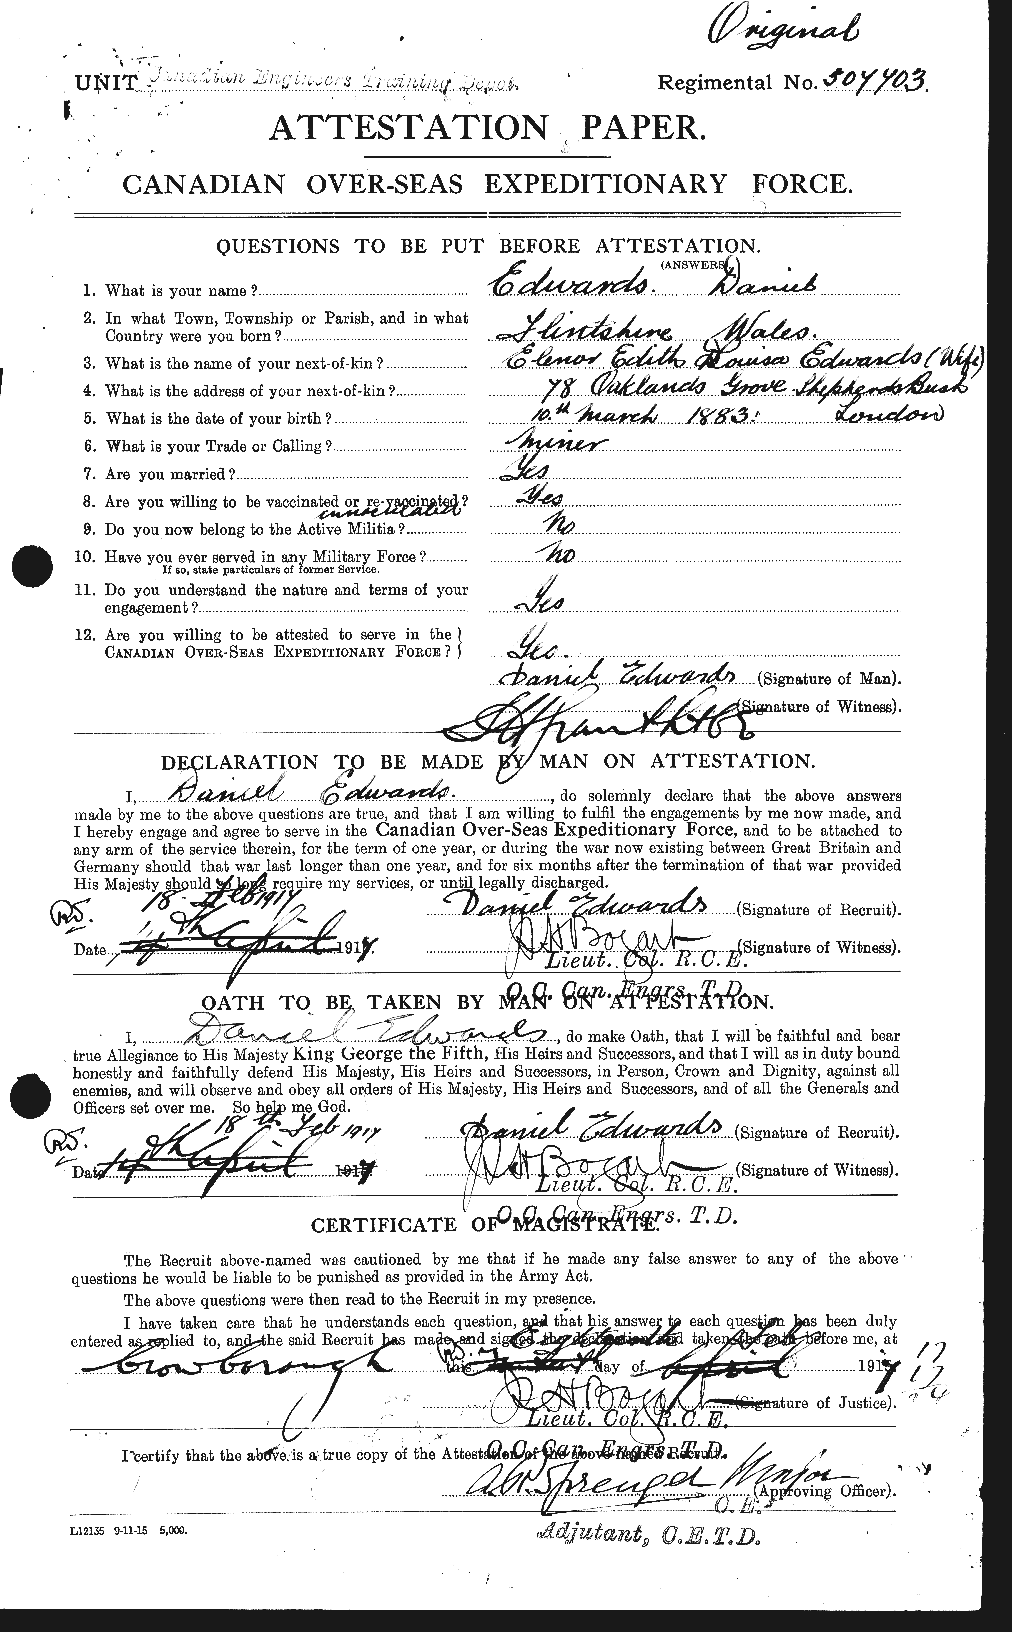 Personnel Records of the First World War - CEF 307863a